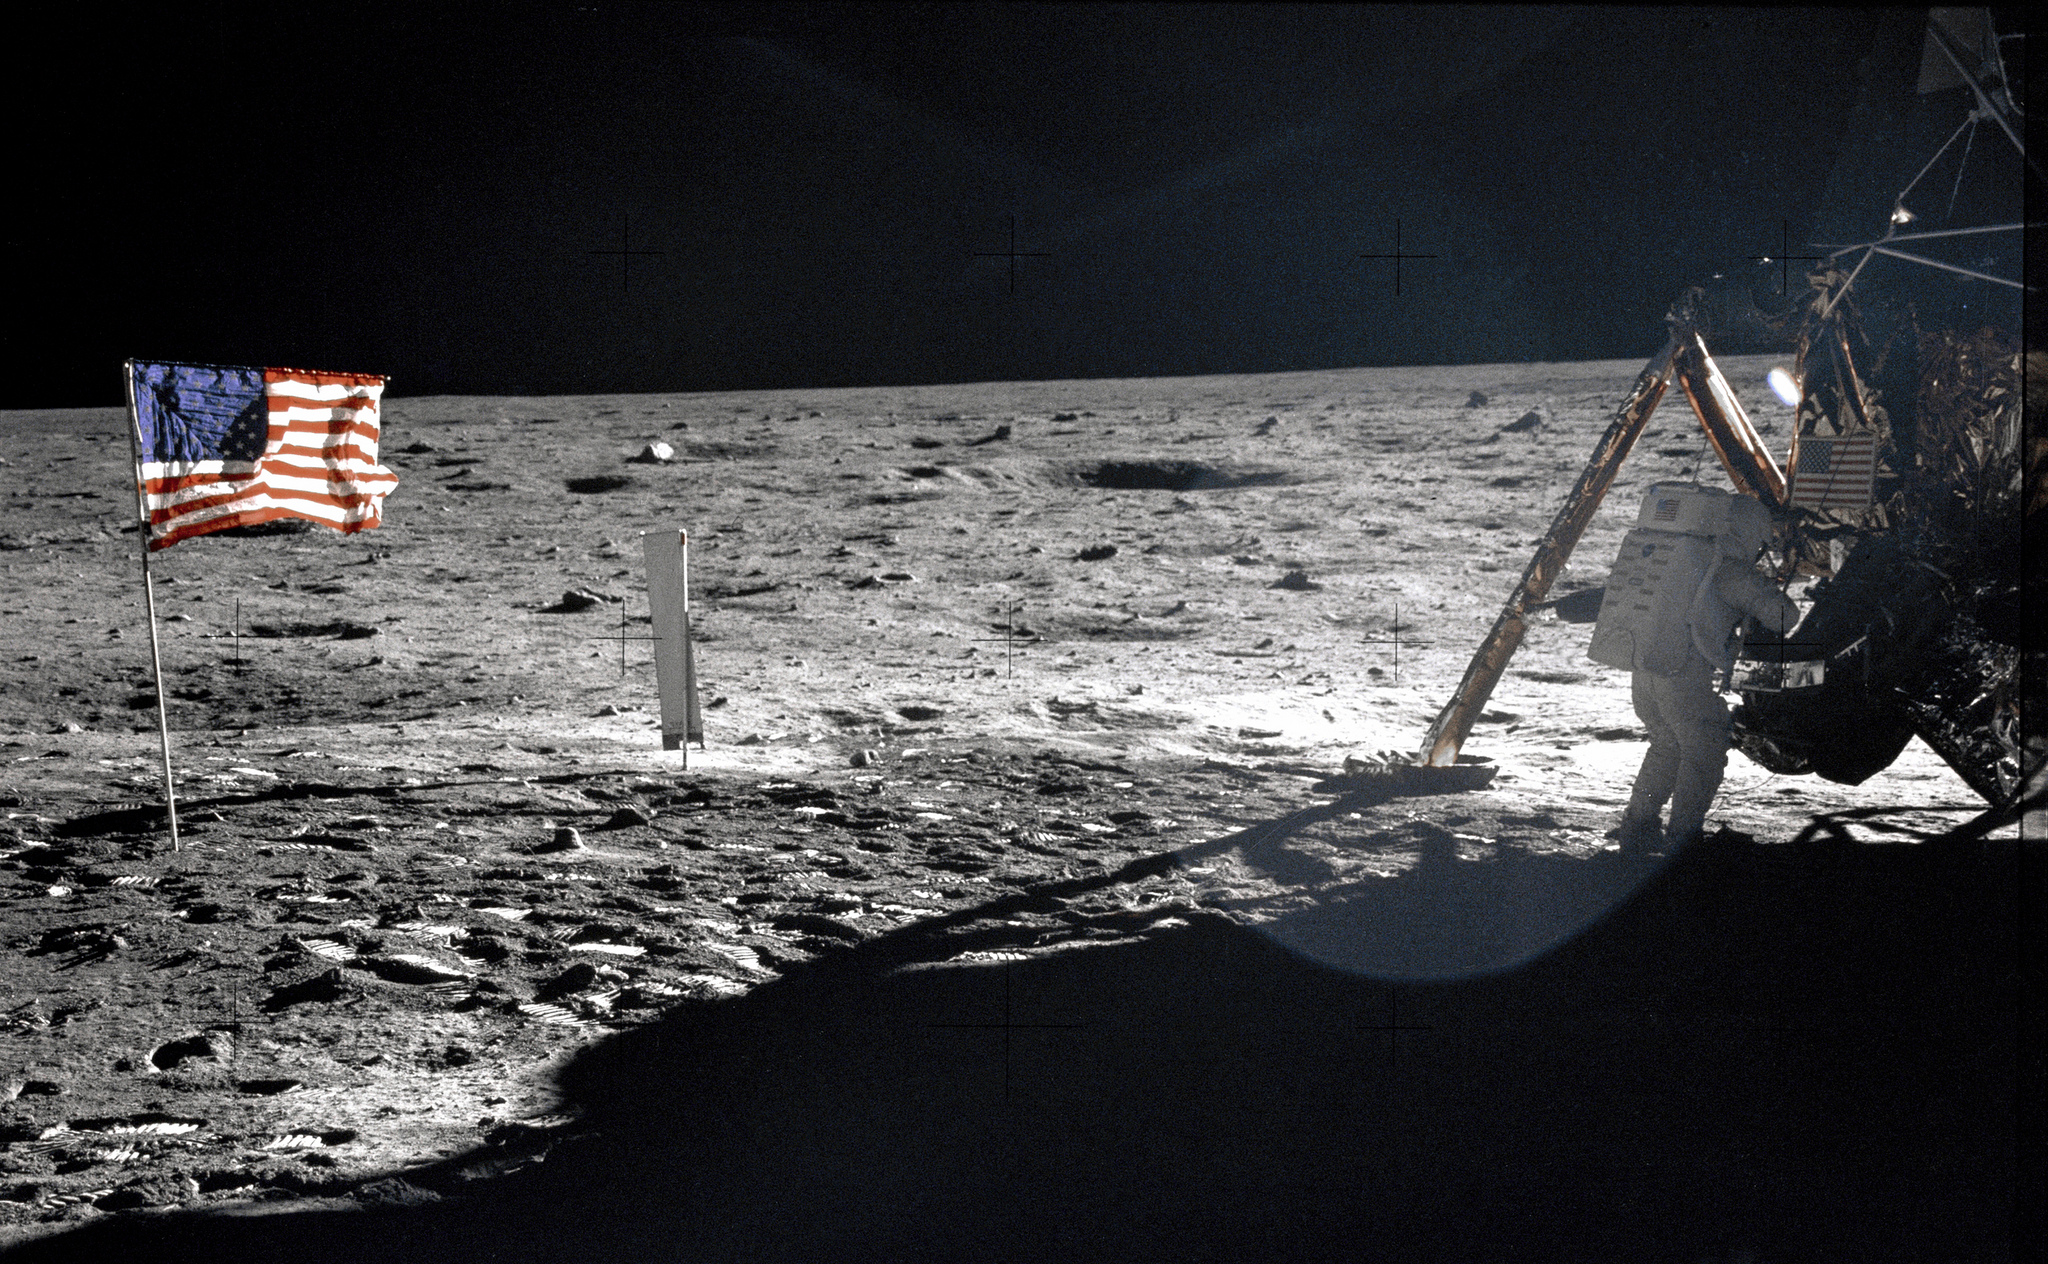 The President’s plan to revisit the moon raises lots of questions—here are the answers